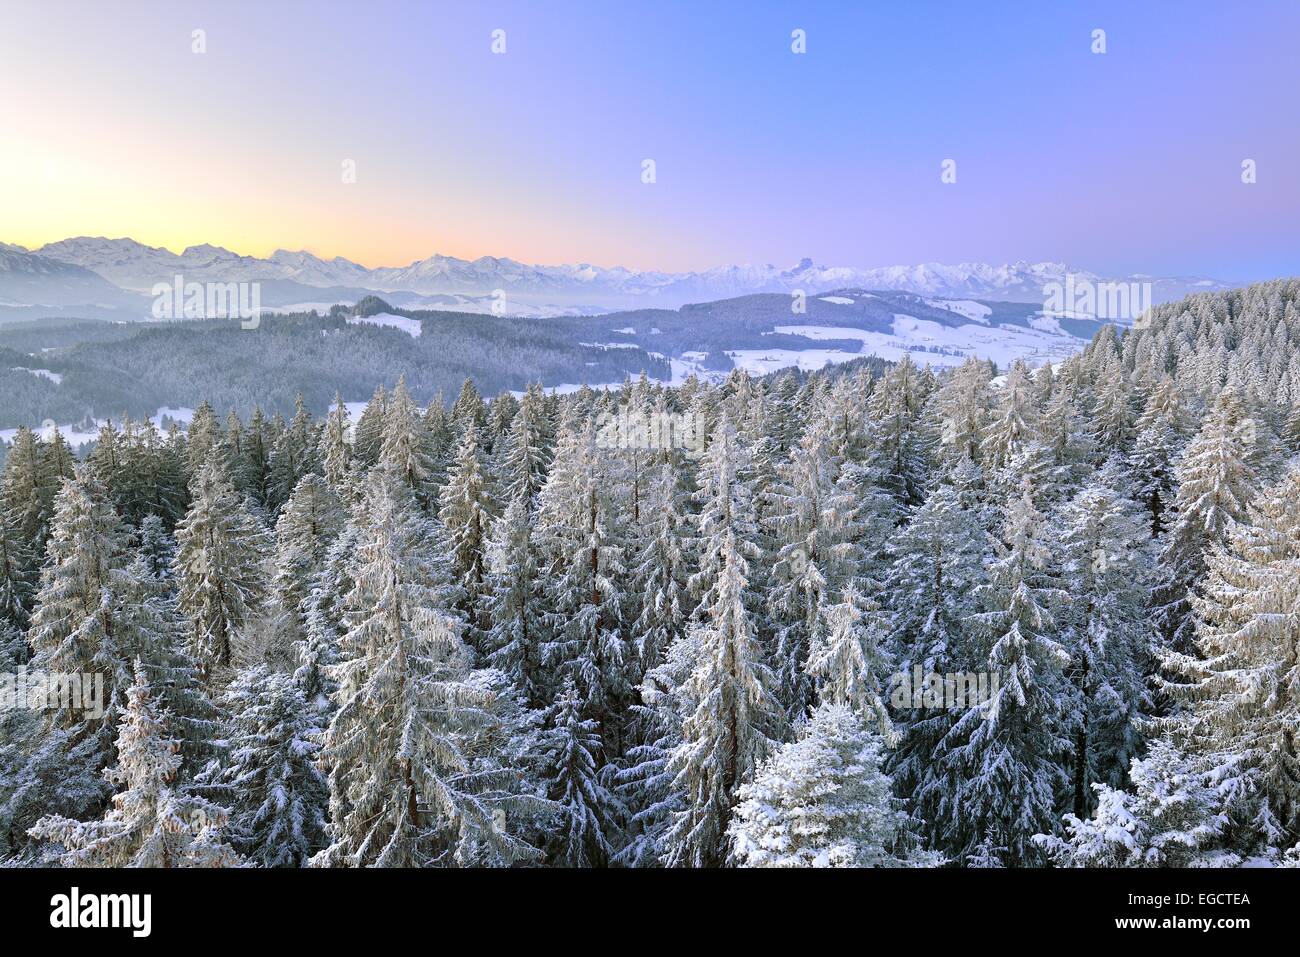 View from Chuderhüsi over snow-covered fir trees in the Emmental region at dawn, at the back the Bernese Alps with the Stock Photo